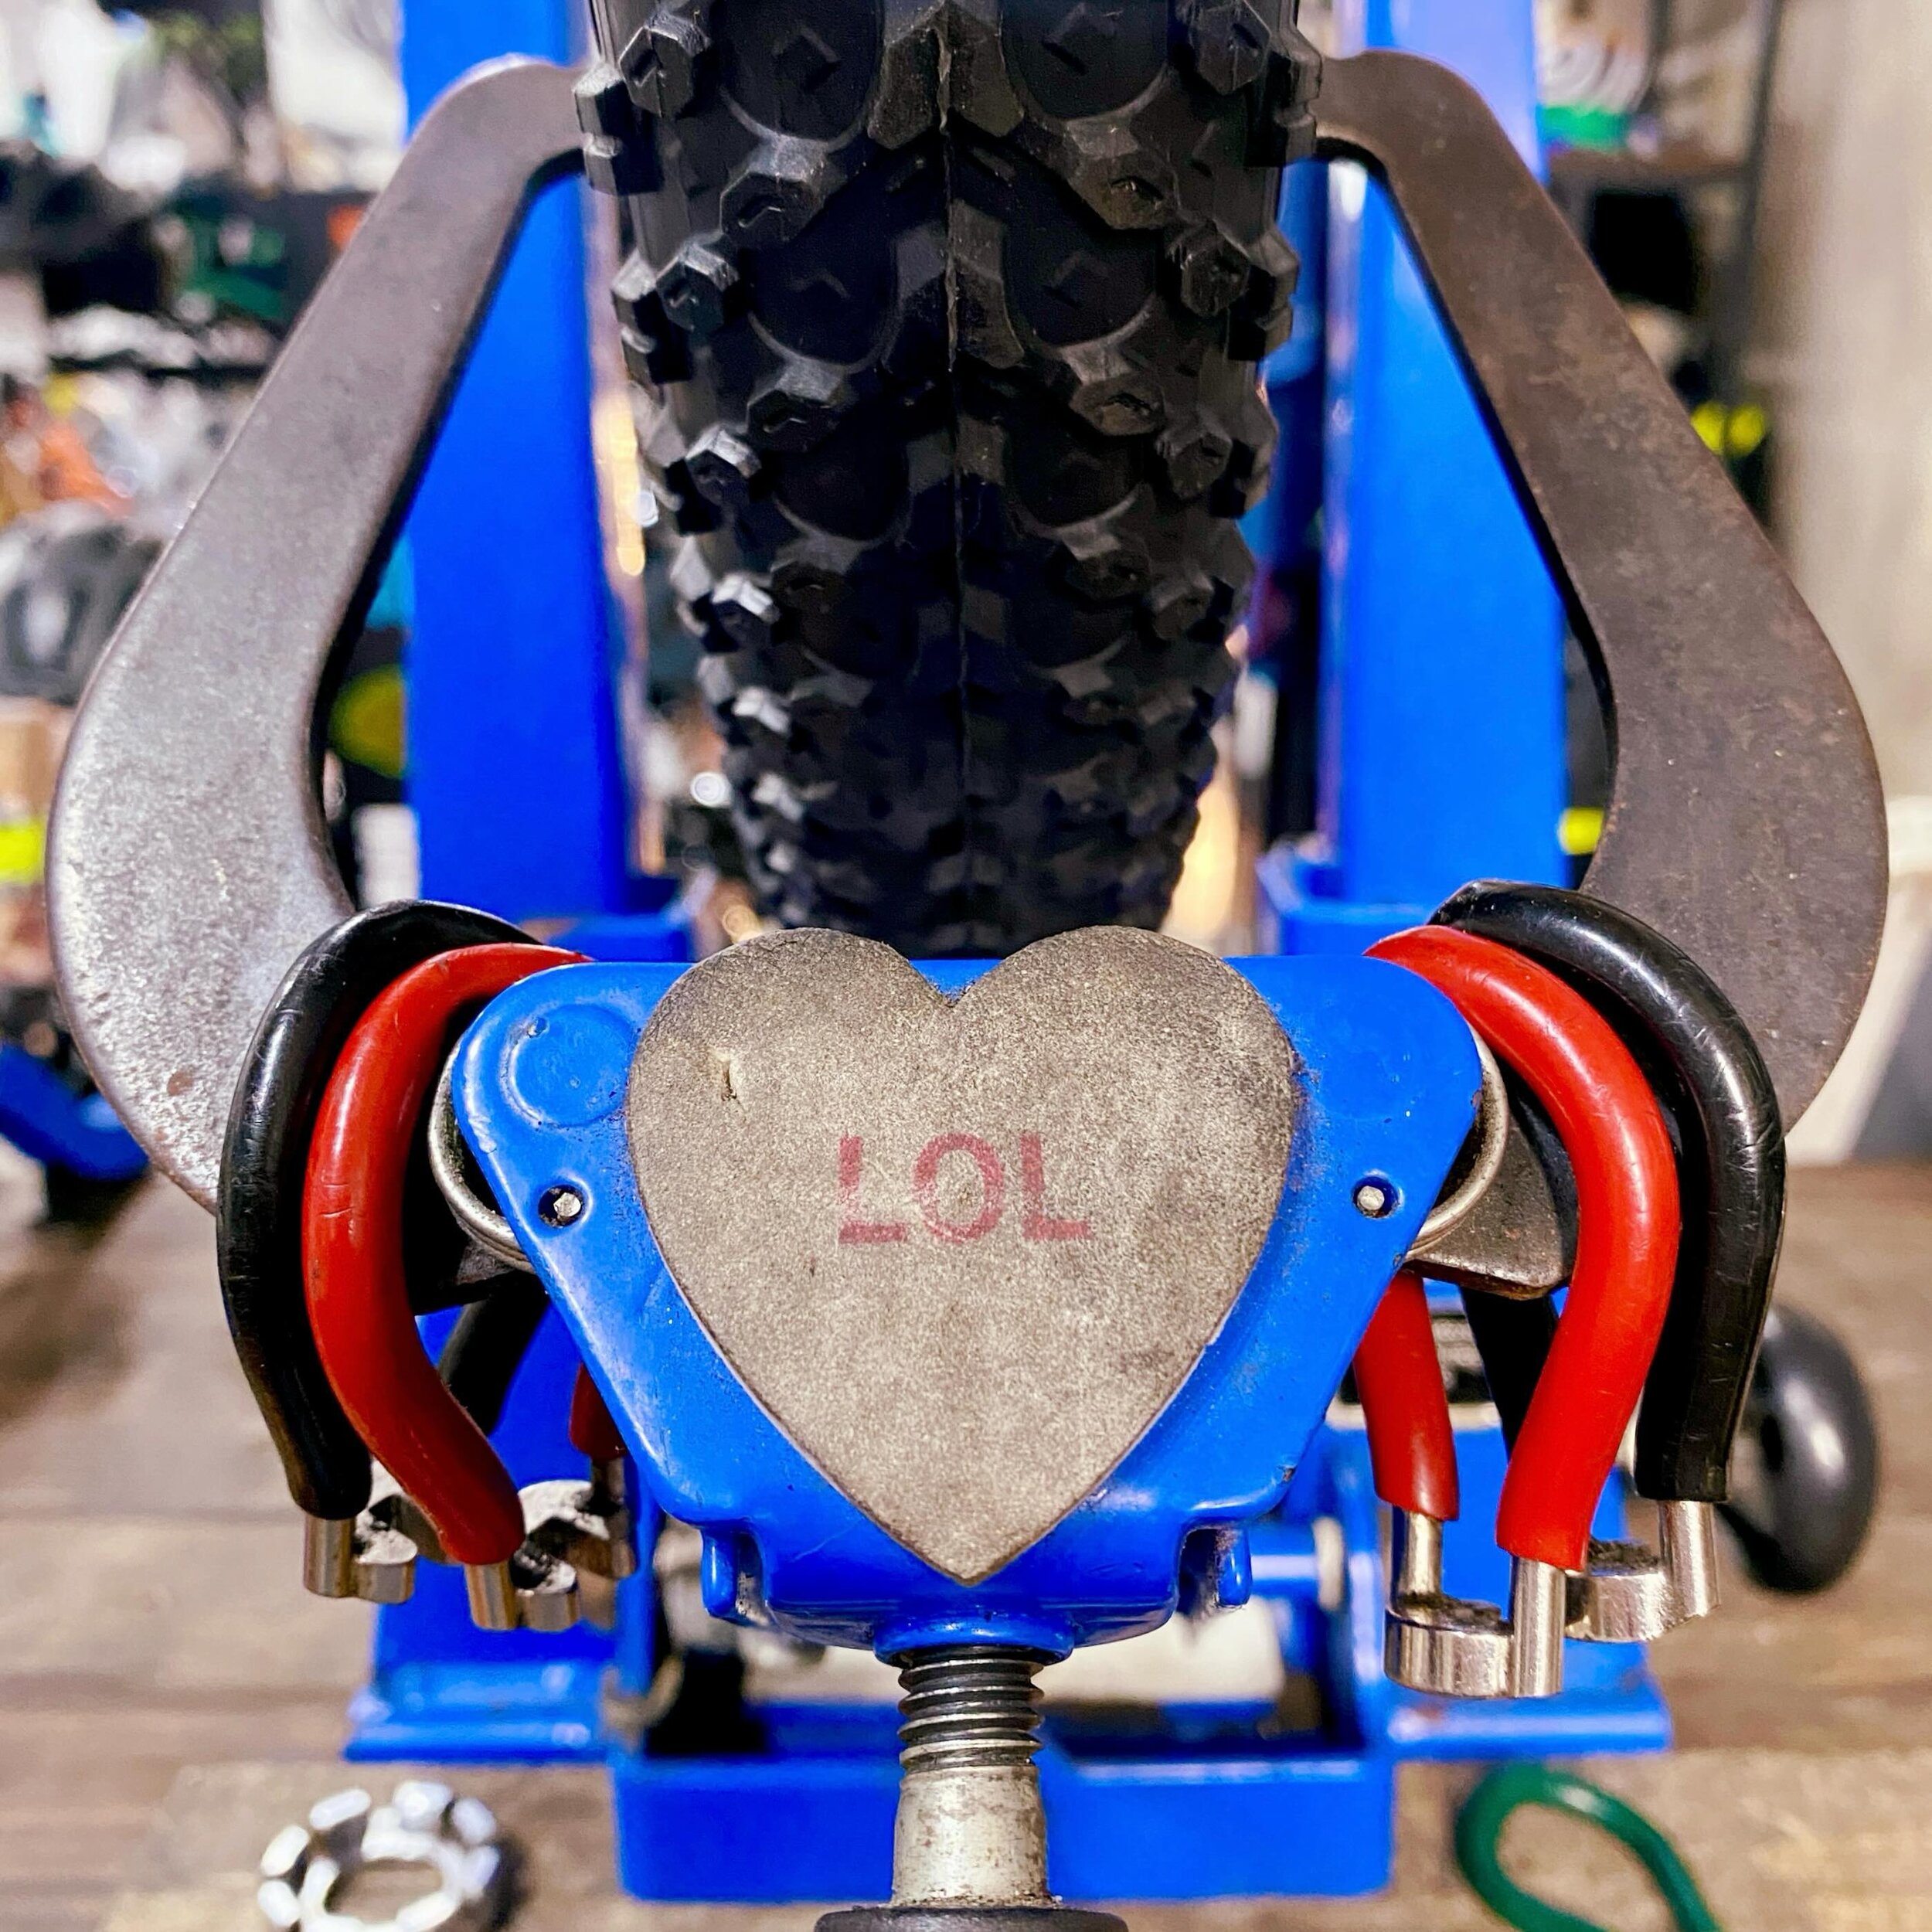 Been using this truing stand for YEARS and just noticed the LOL heart 🤣🫶 because we&rsquo;re just THAT that dialed in to the task at hand 👌

#Nolabikelife #nola #ride #nolabikes #neworleans #neworleansbikelife #shoplocal #shopnola #shopneworleans 